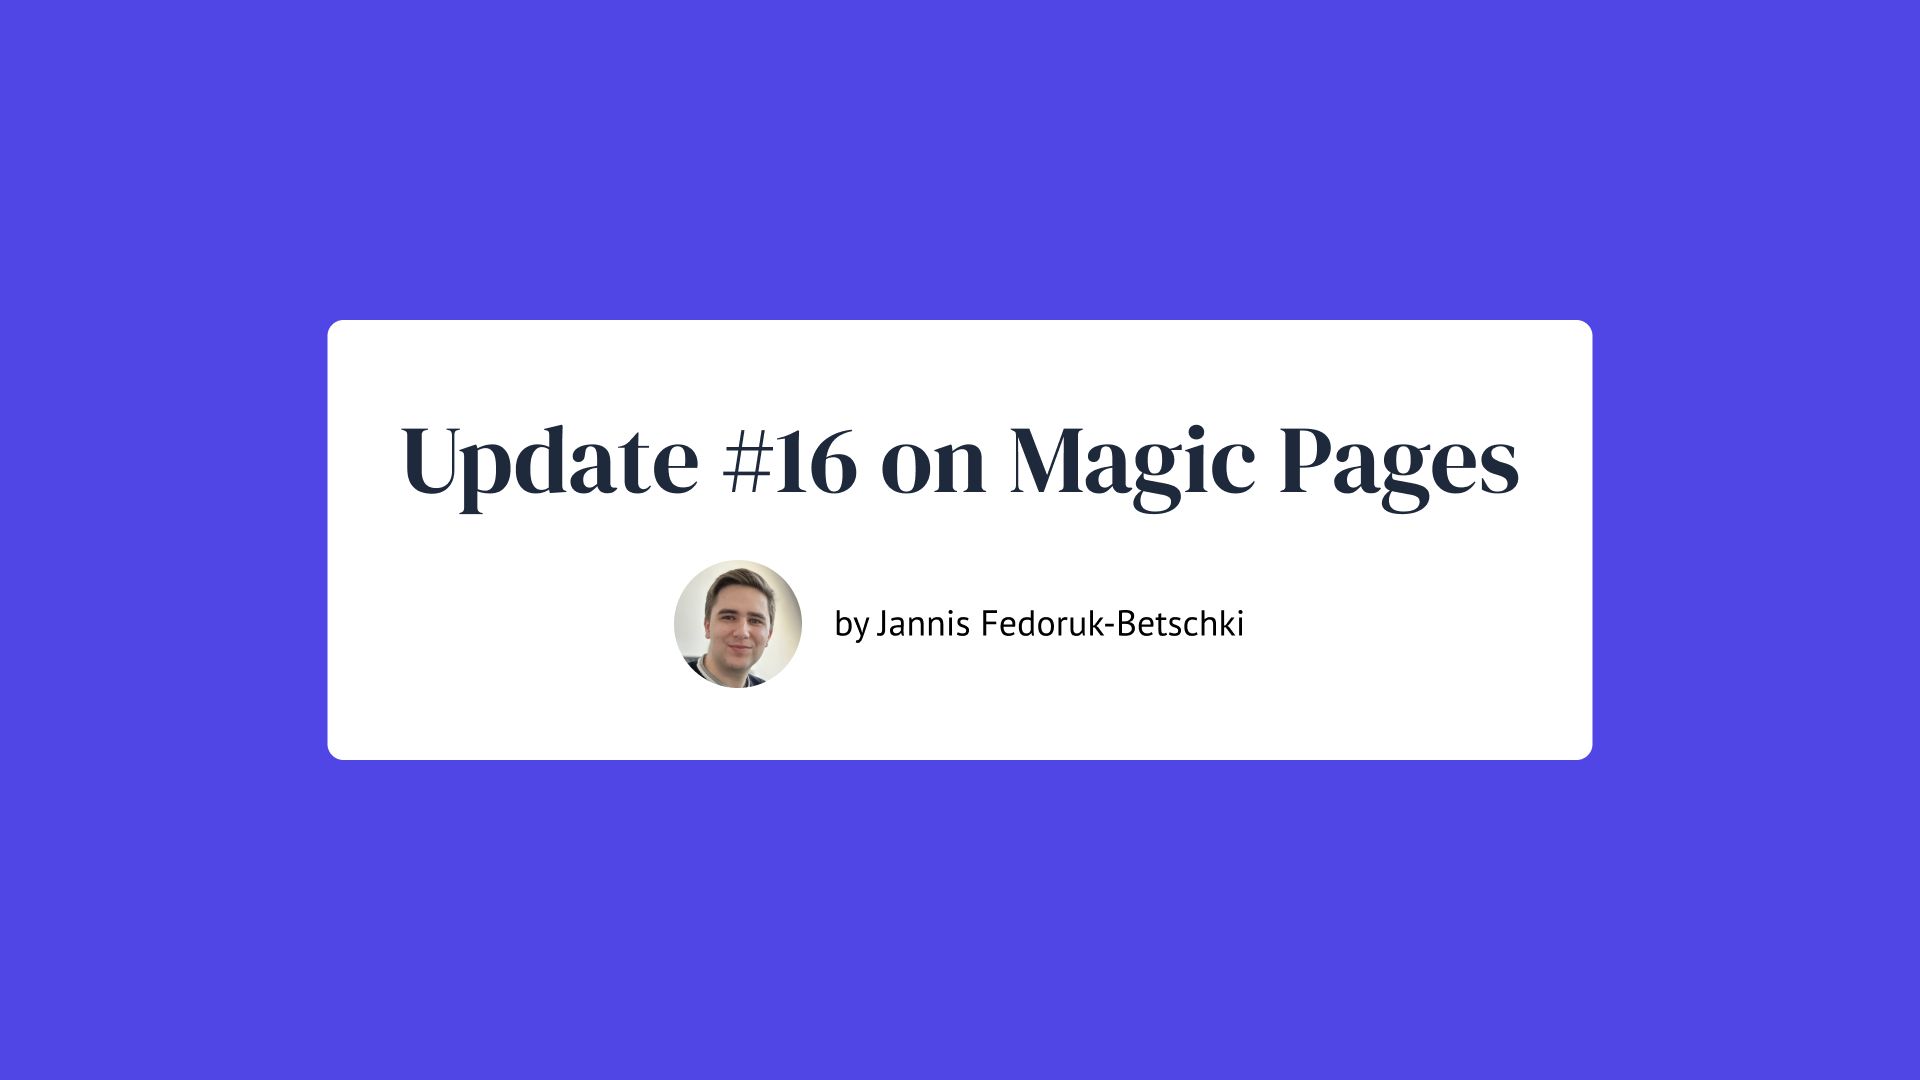 Update #16 on Magic Pages